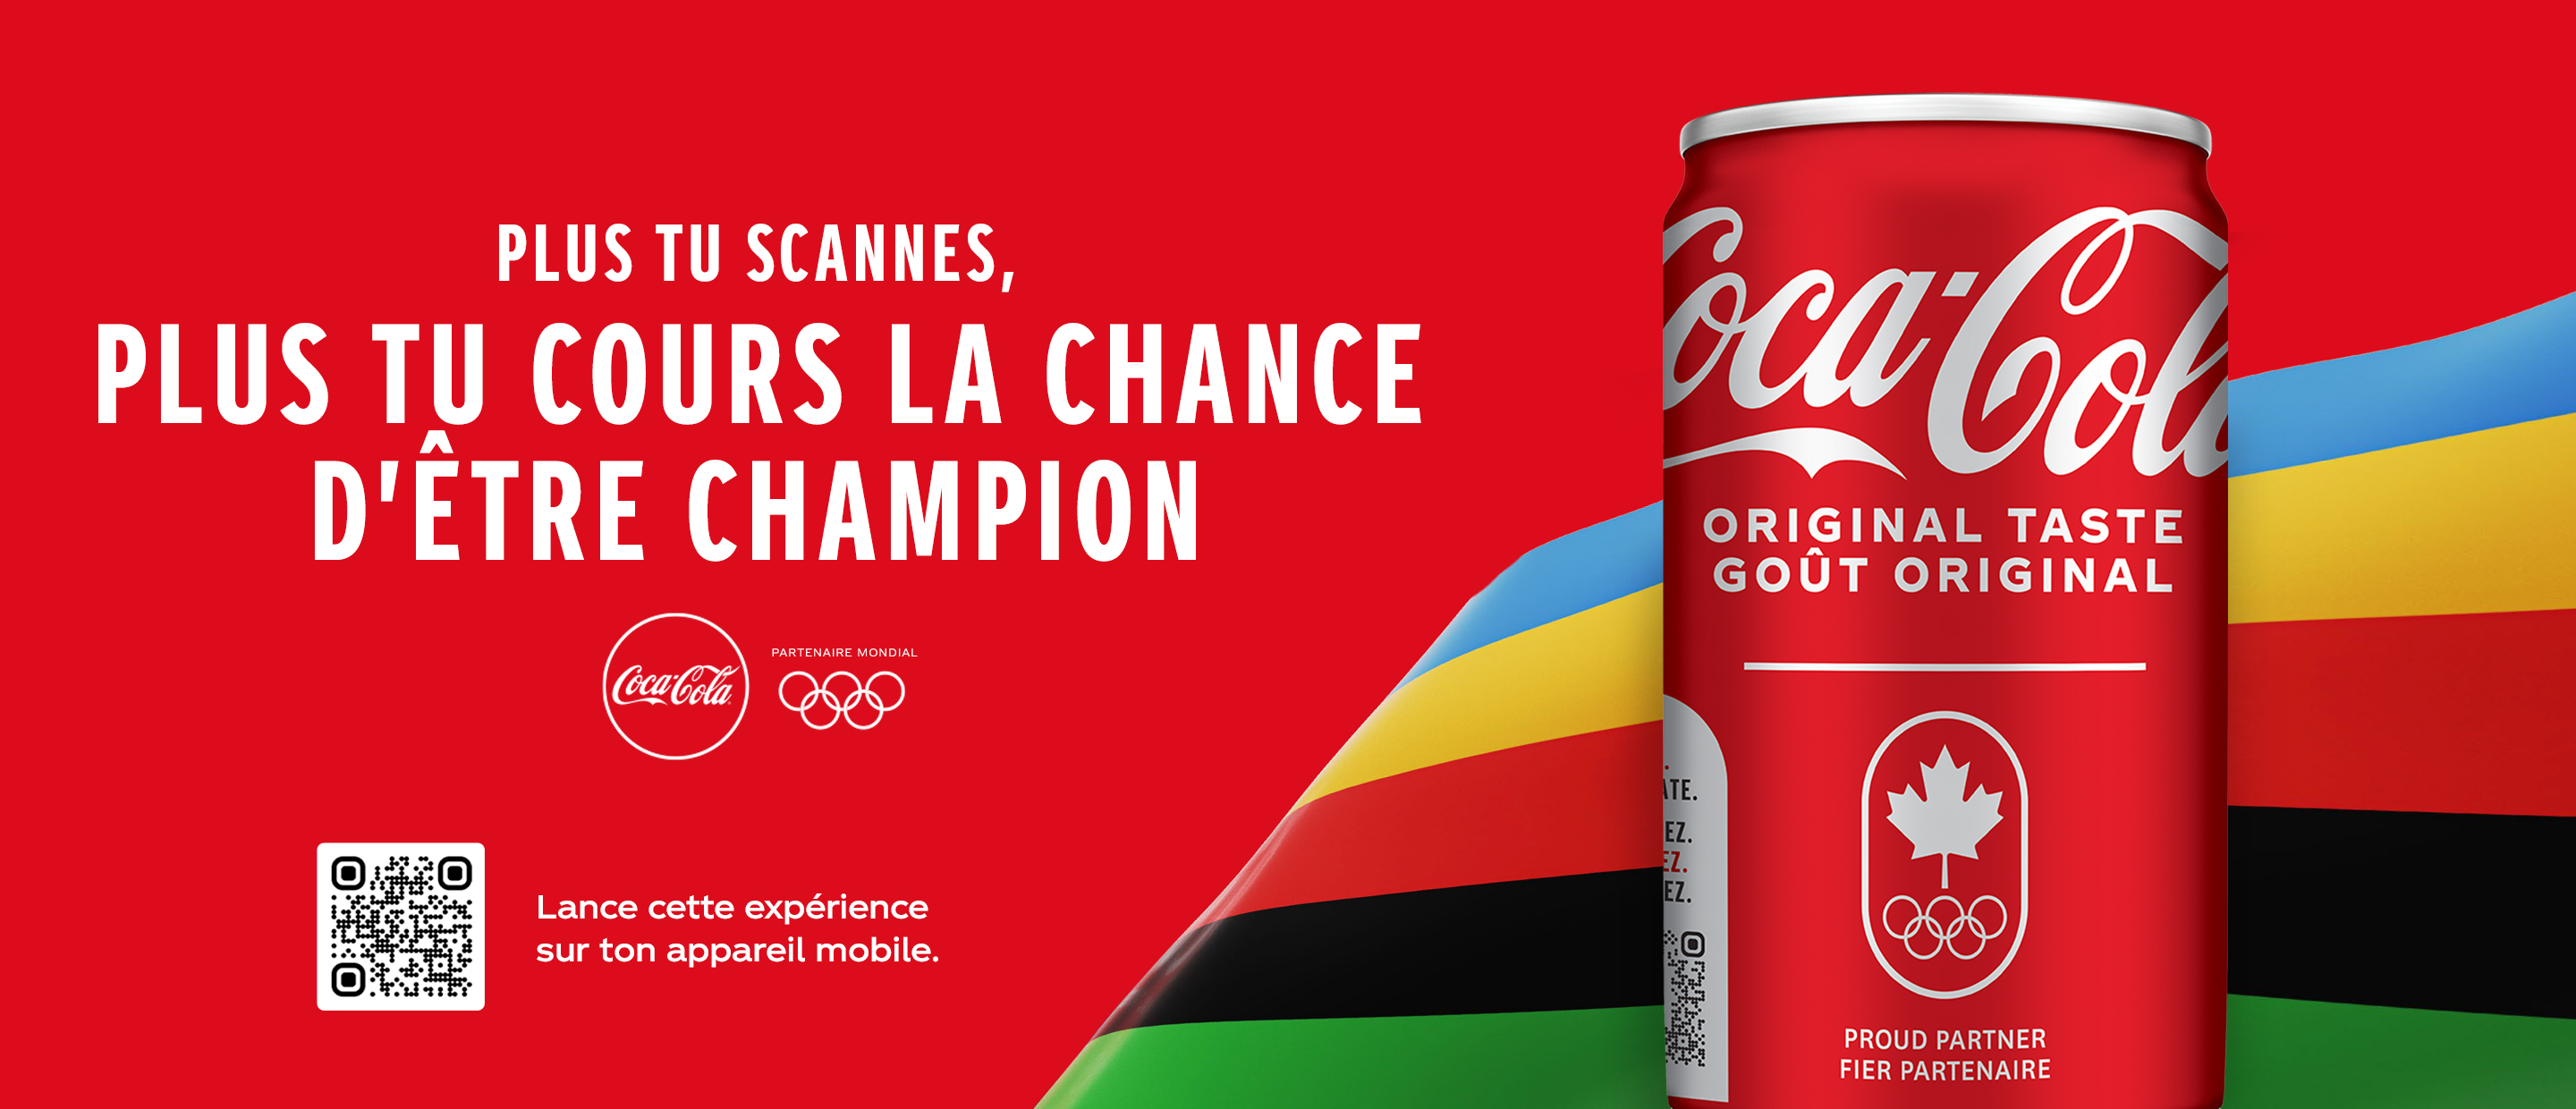 The more you scan, the more chances to be a champion. Launch this experience on your mobile device.